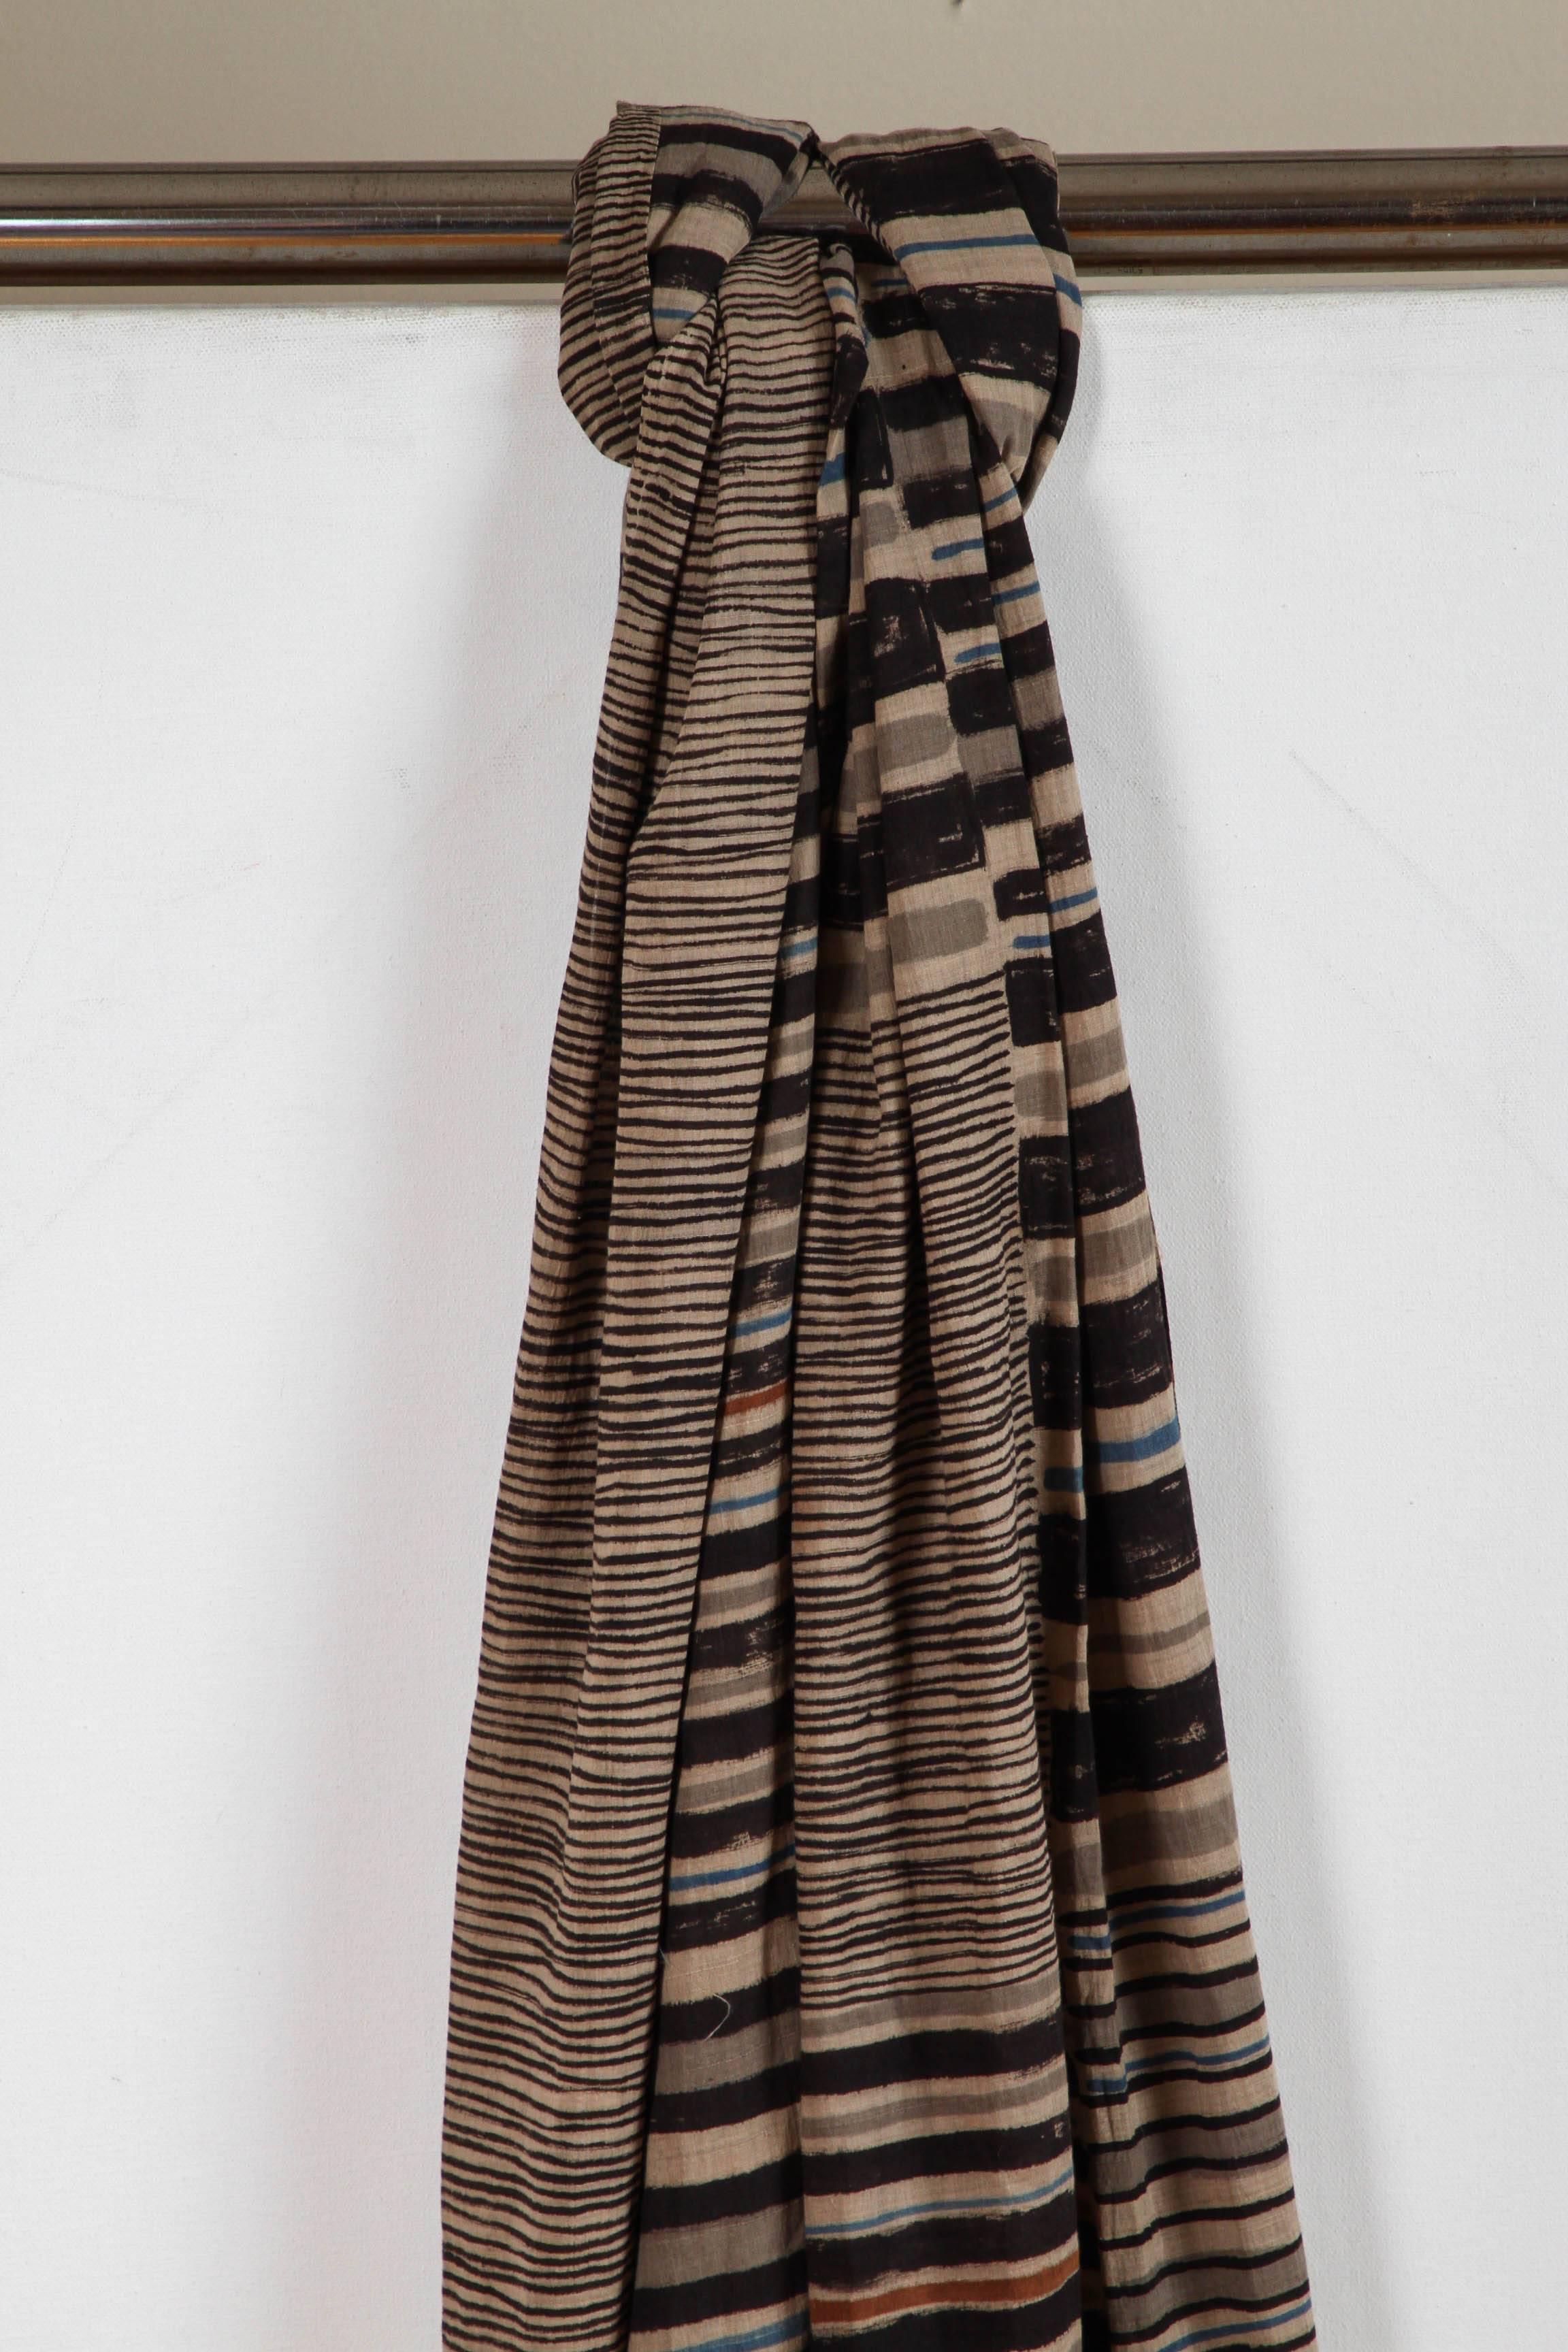 Contemporary hand-painted cotton scarf or shawl. Organic cotton and natural textile dyes. Artist: Ajit Kumar Das.